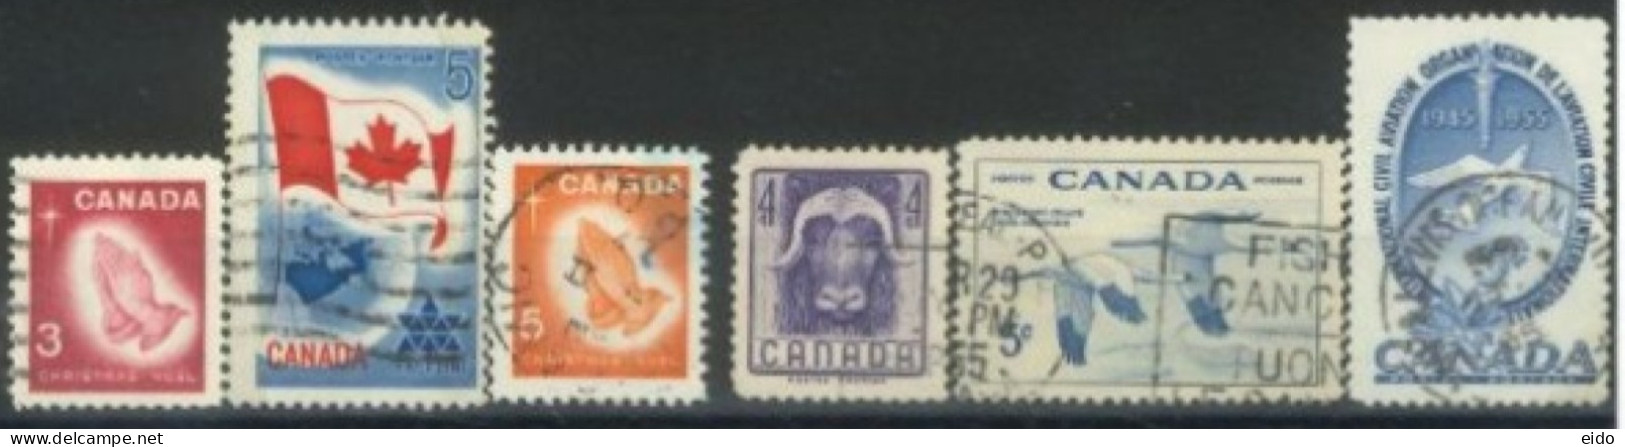 CANADA - 1955/67, STAMPS SET OF 6, USED. - Used Stamps